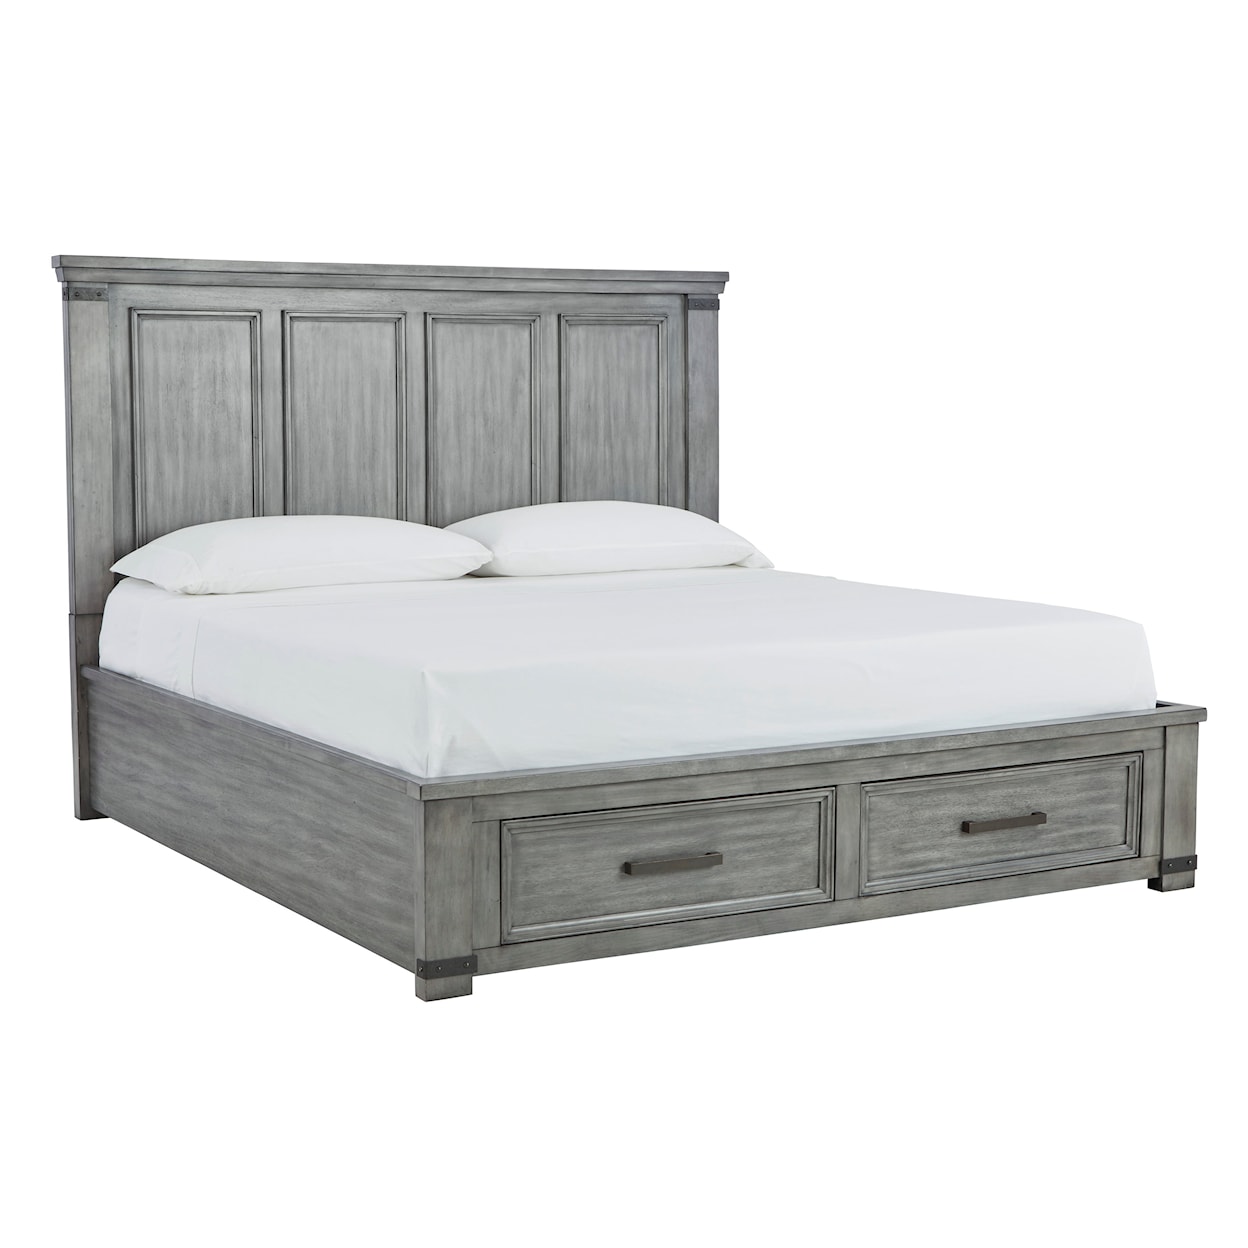 Ashley Signature Design Russelyn California King Storage Bed